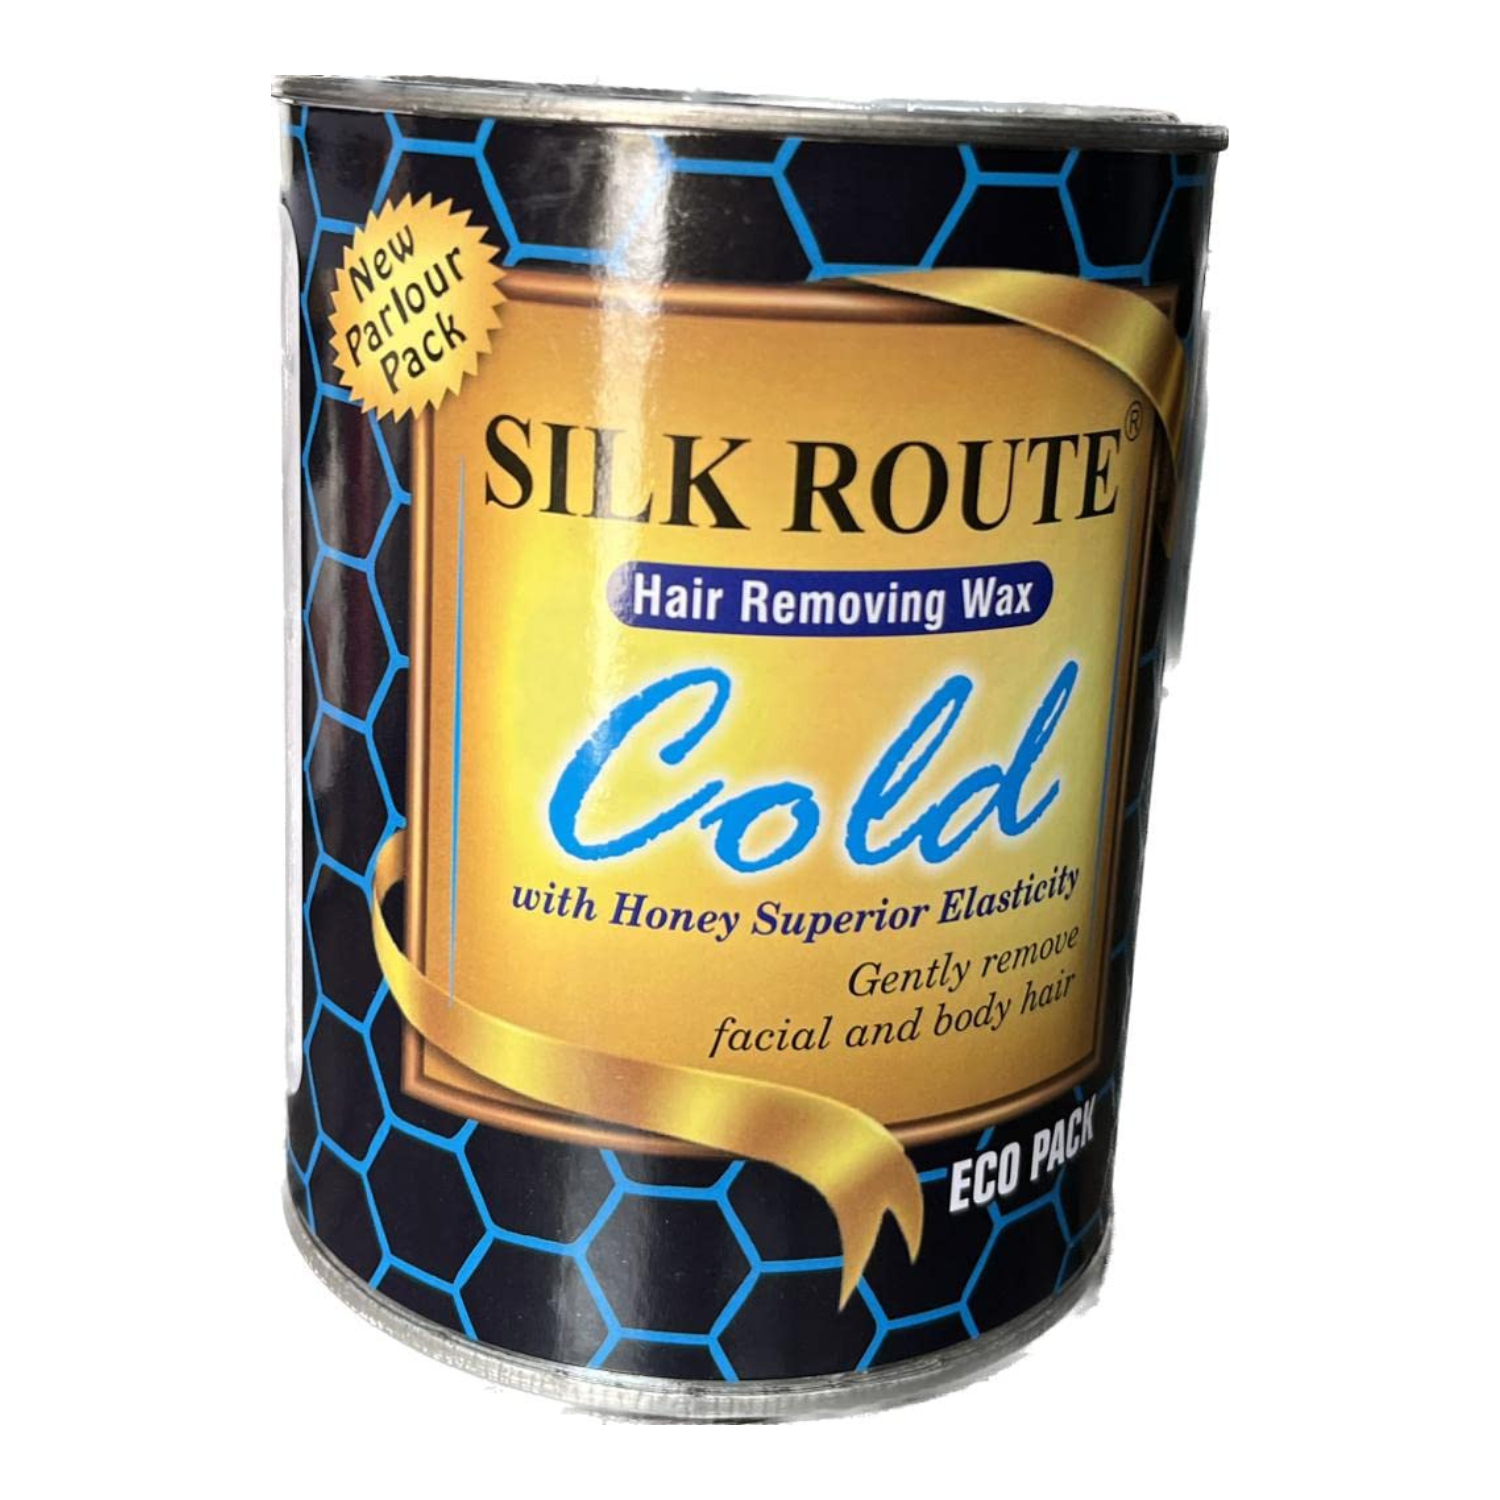 Silk Route Cold Wax Echo Pack